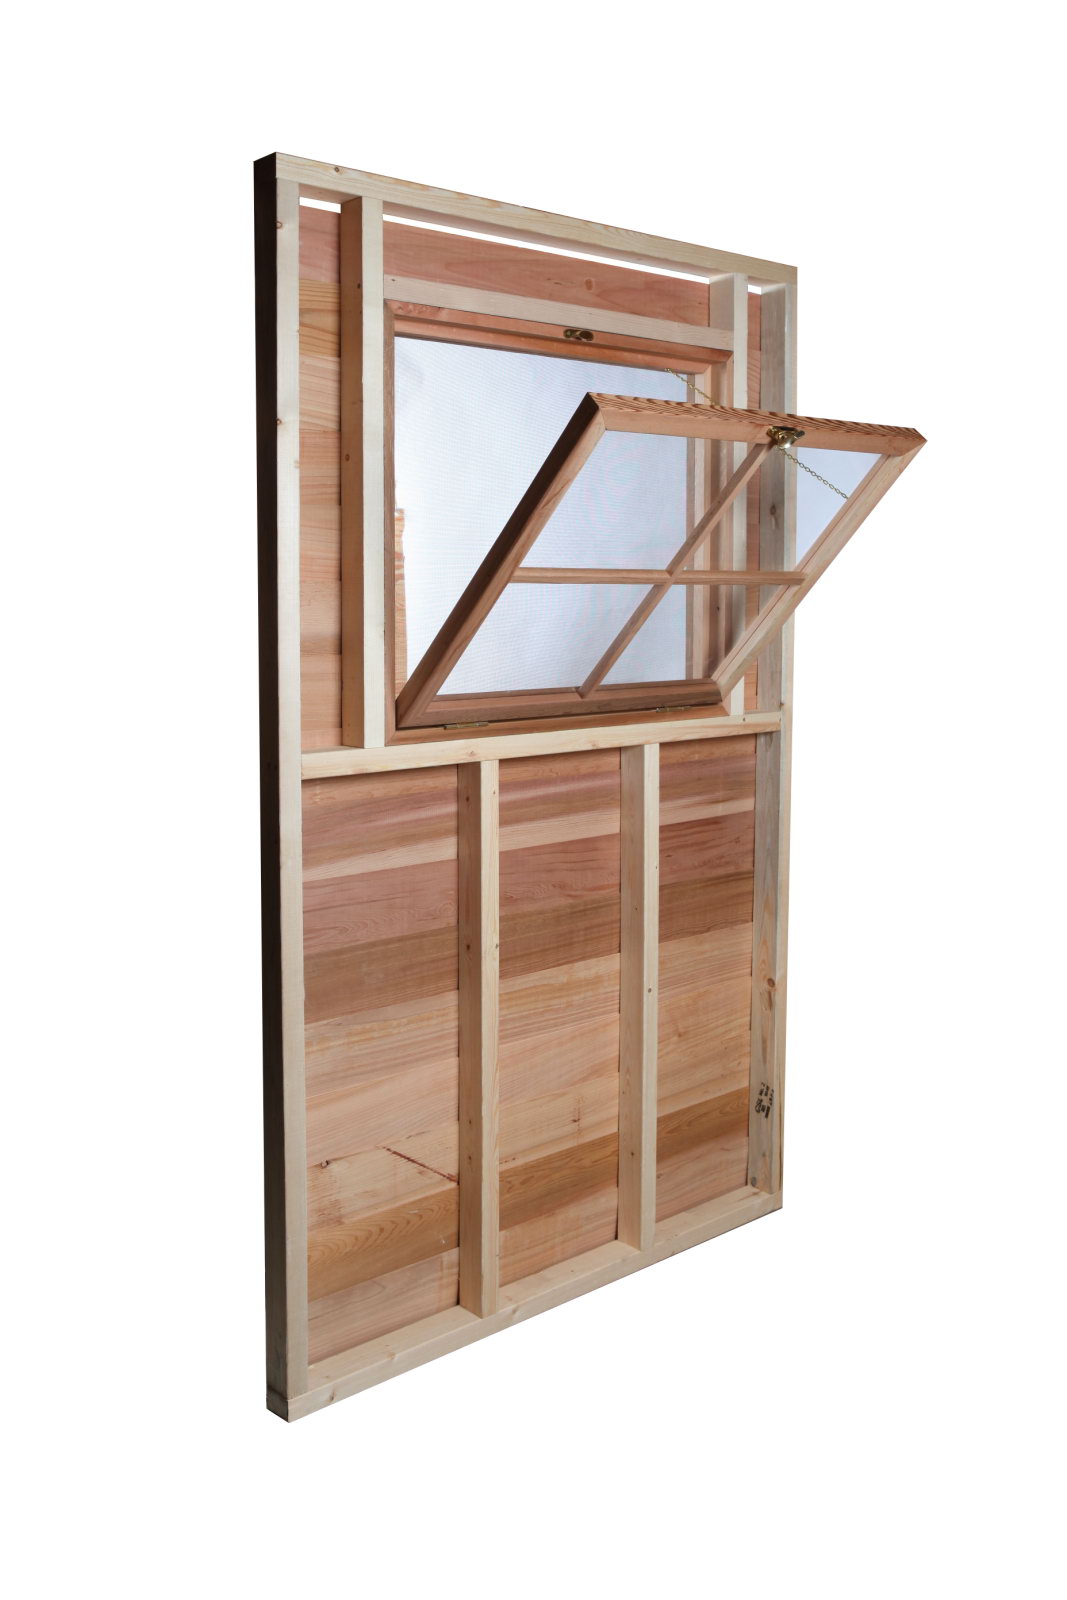 functional shed window with screen option